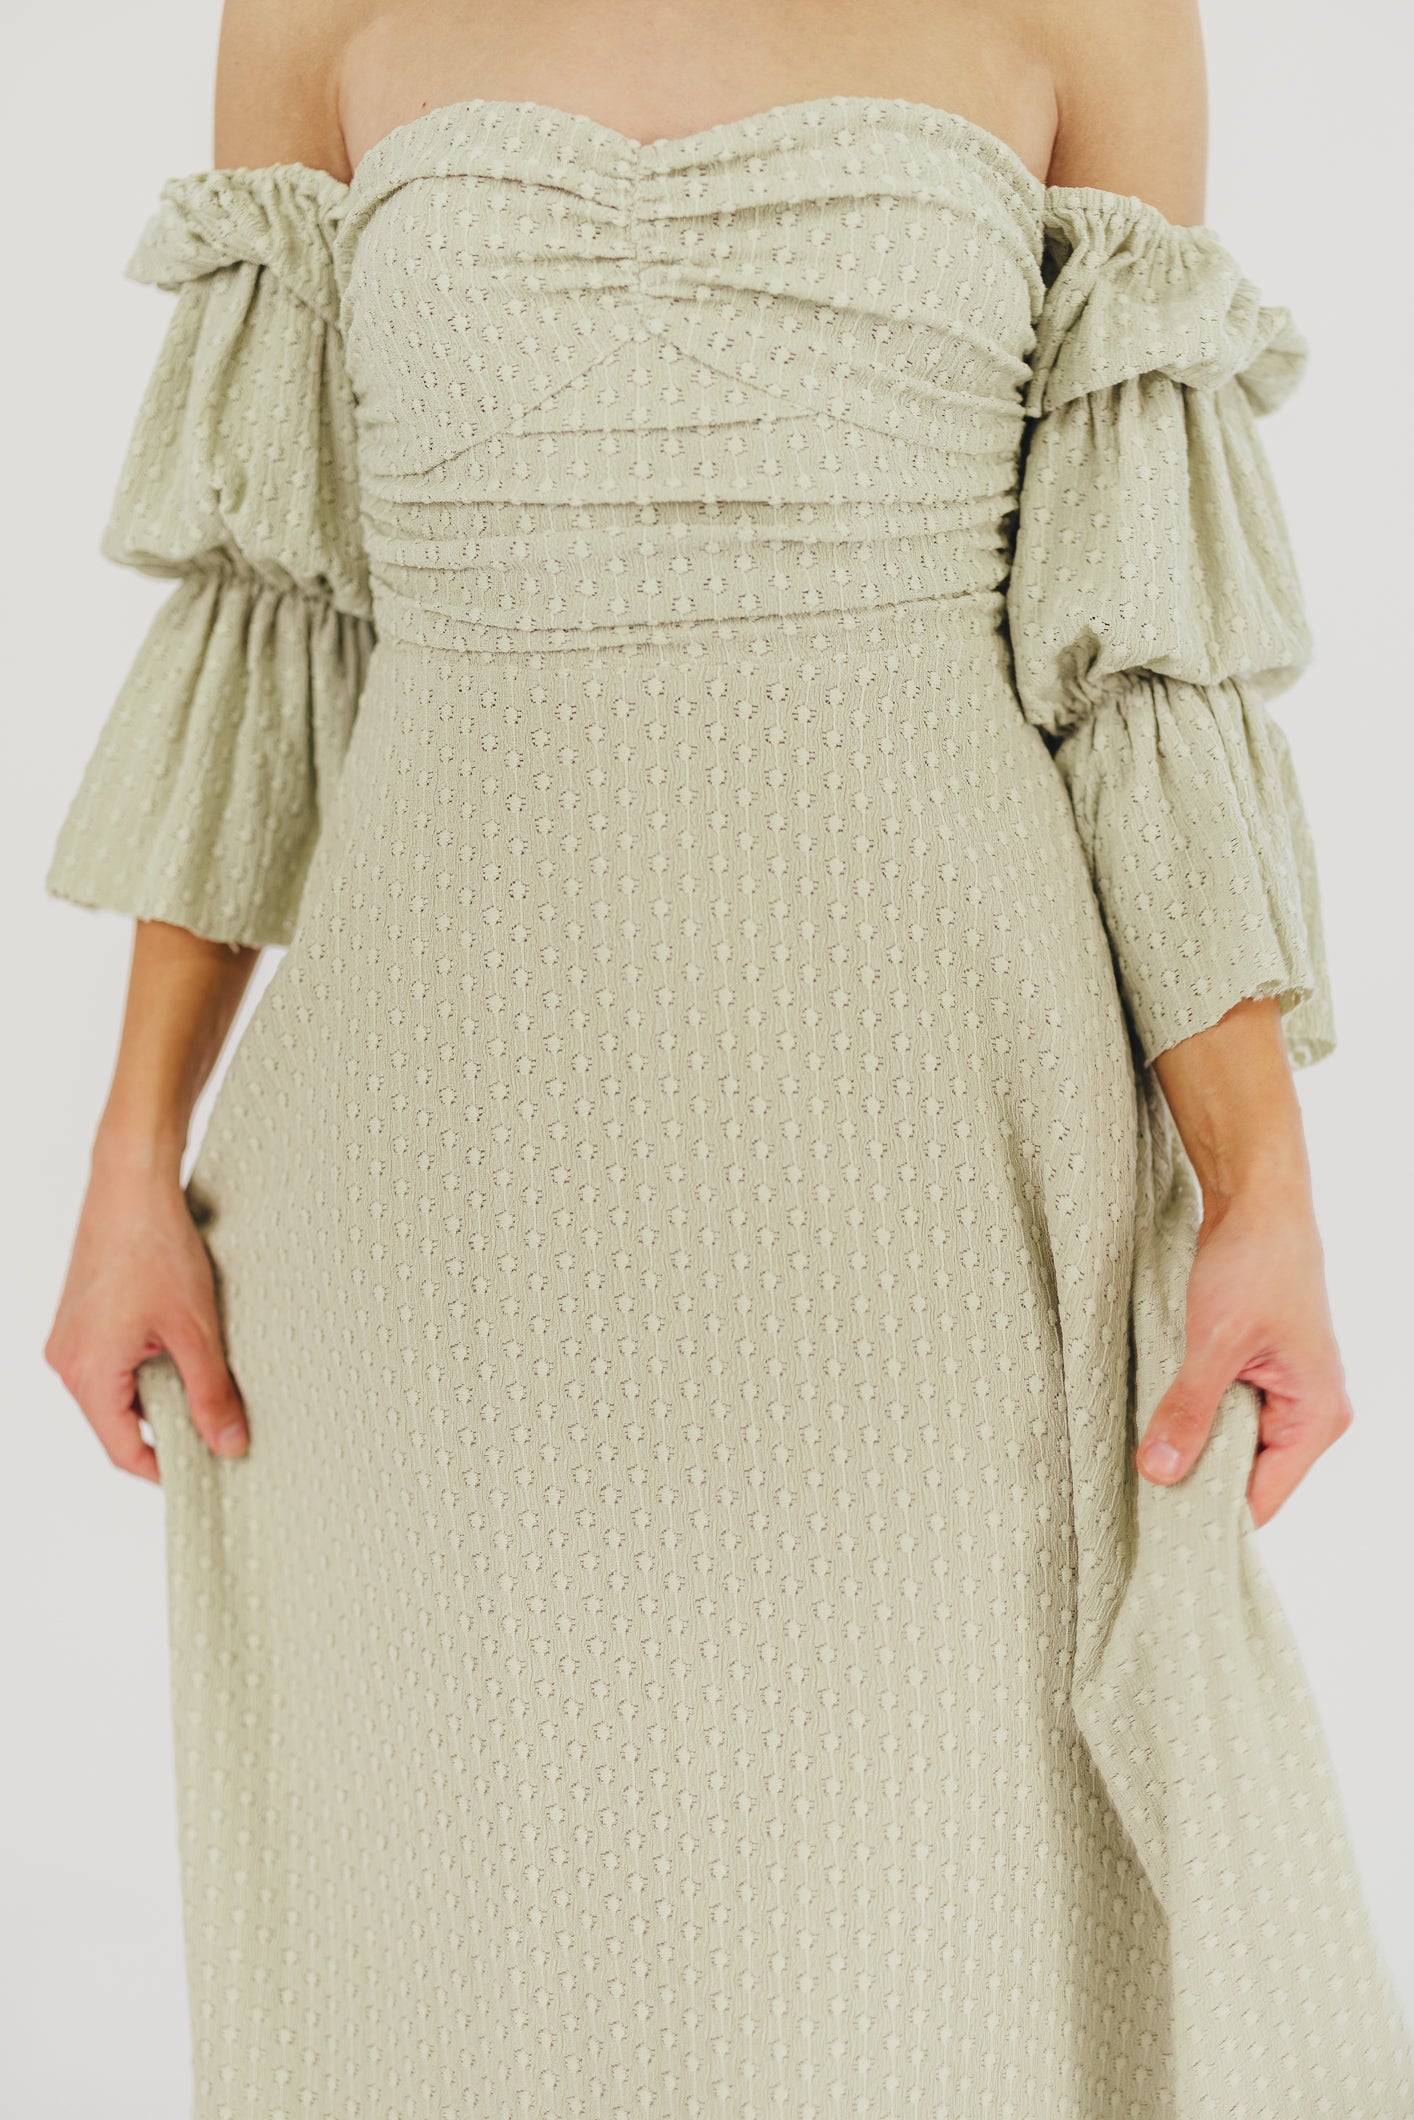 Corrine Tiered Sleeve Maxi Dress with Pockets in Light Olive Green - Bump Friendly